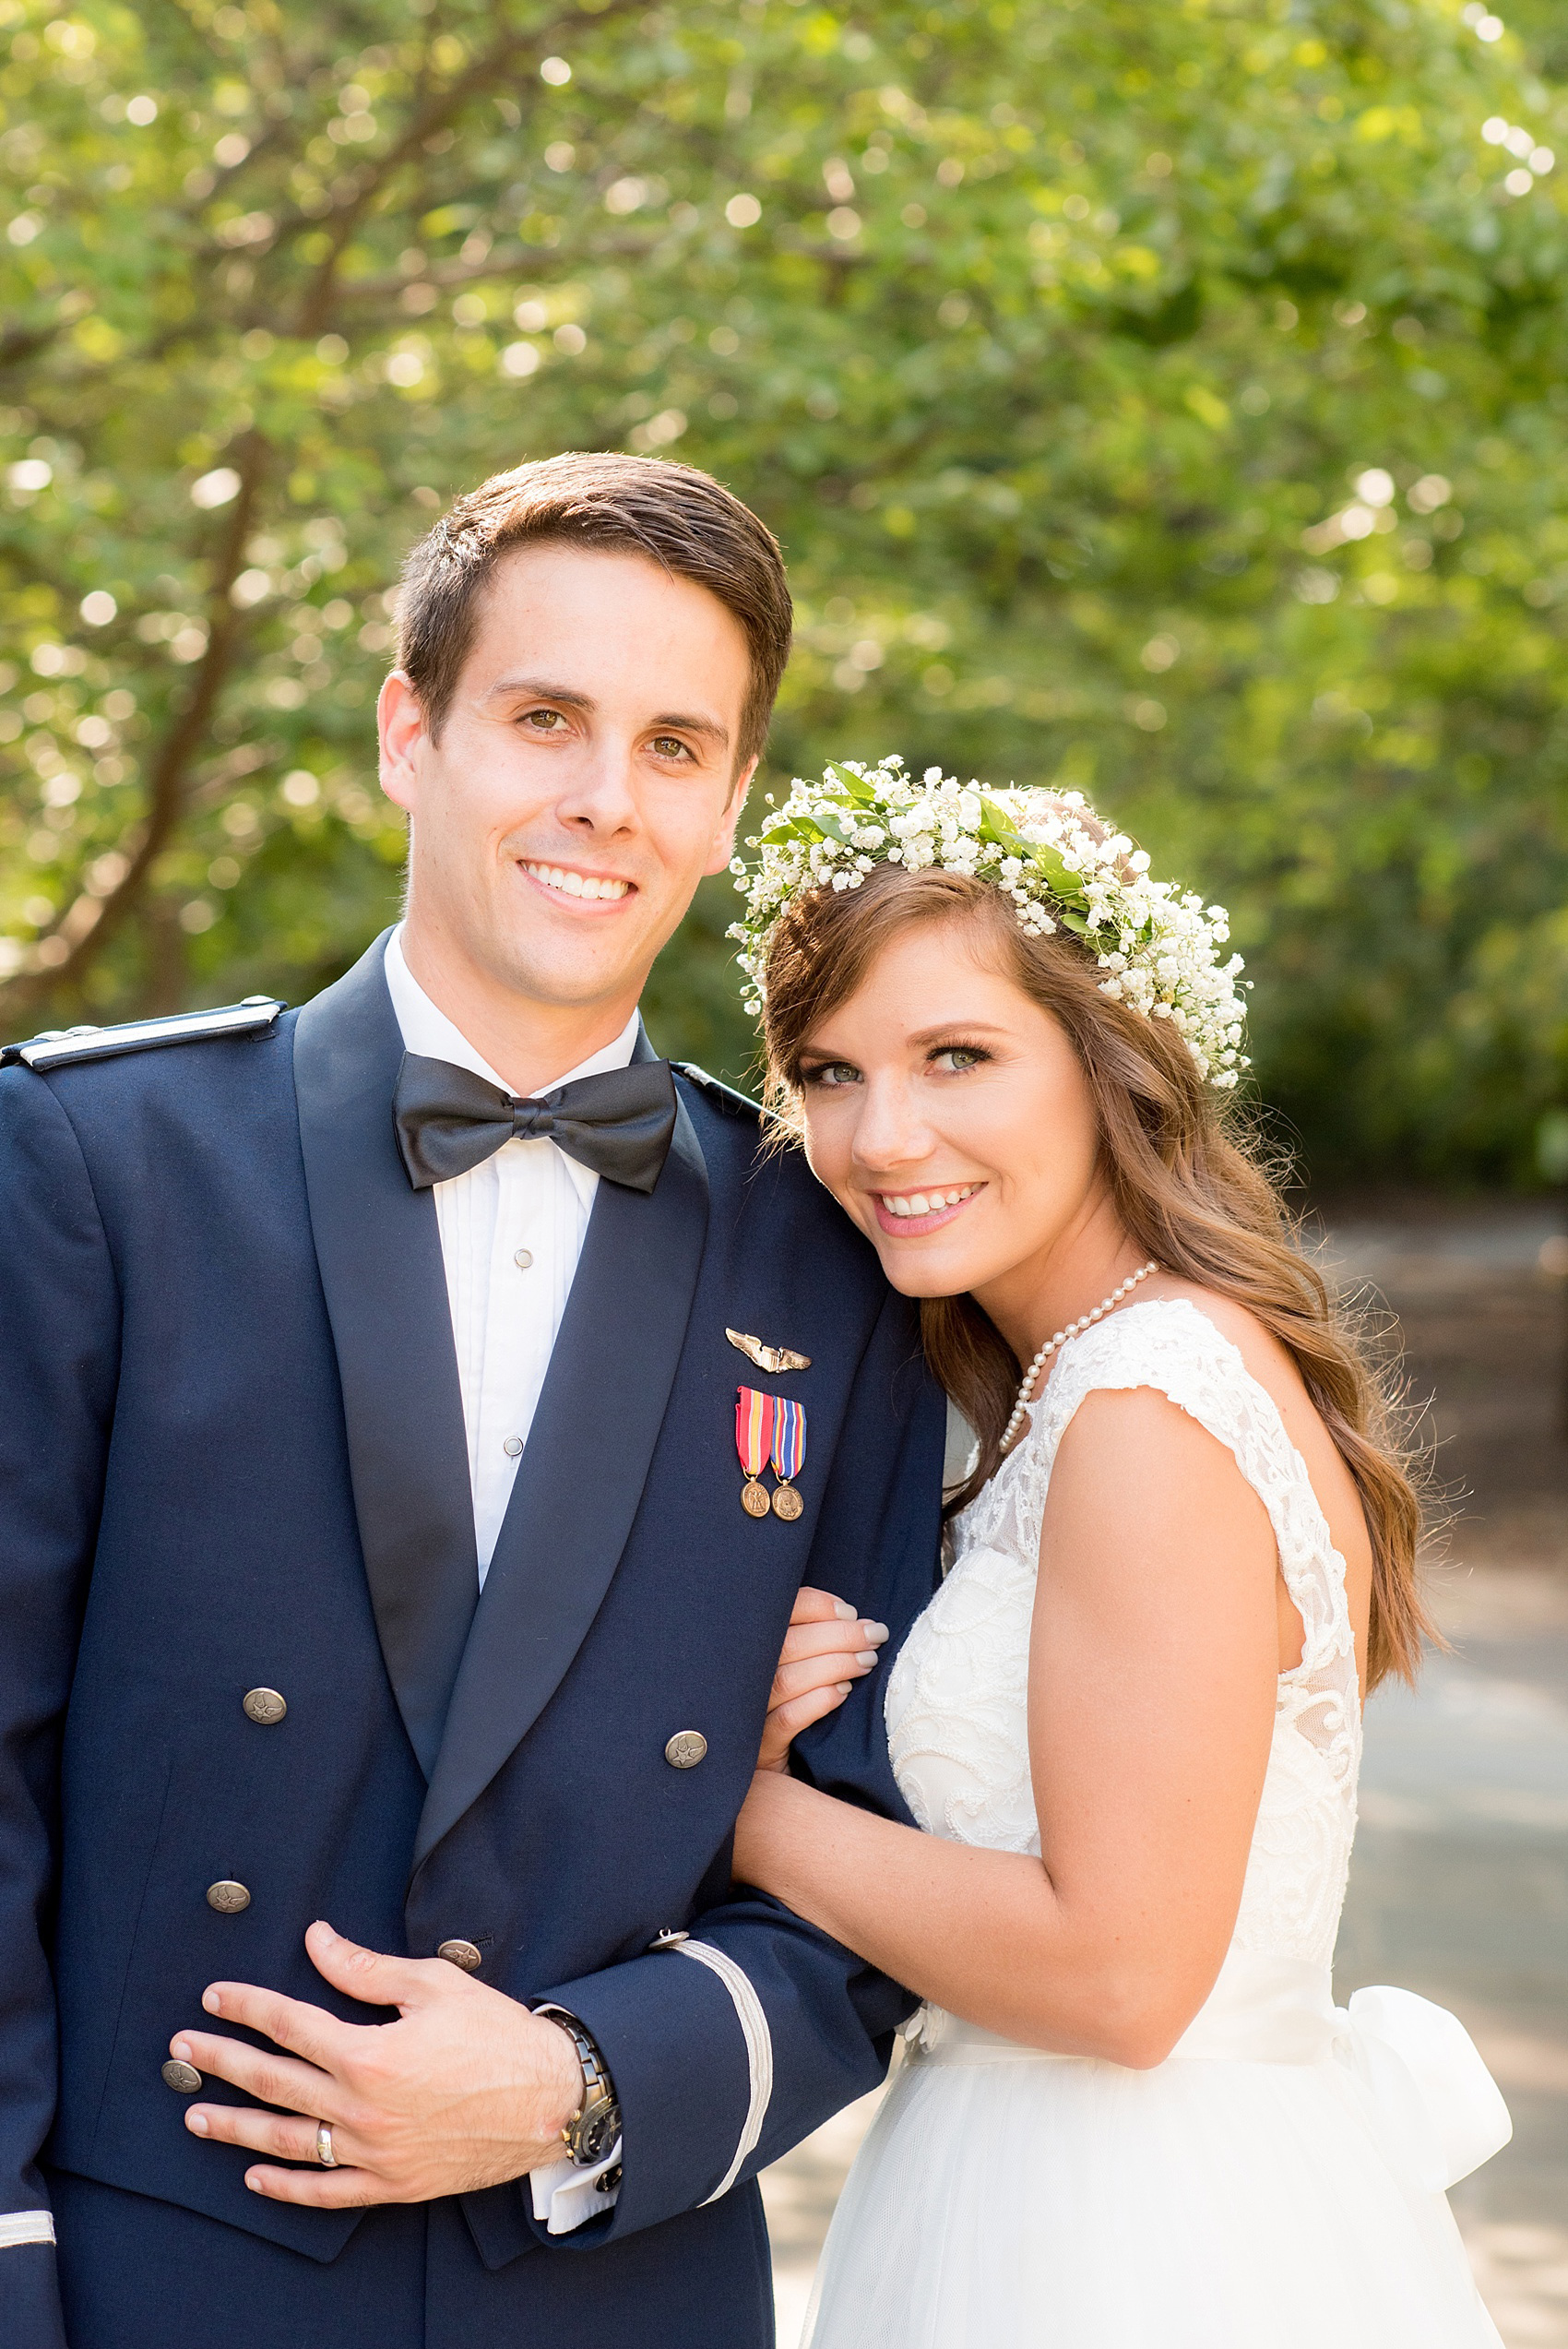 Mikkel Paige Photography photo of a Duke Chapel wedding with groom in Air Force uniform and bride in Baby's Breath flower crown.